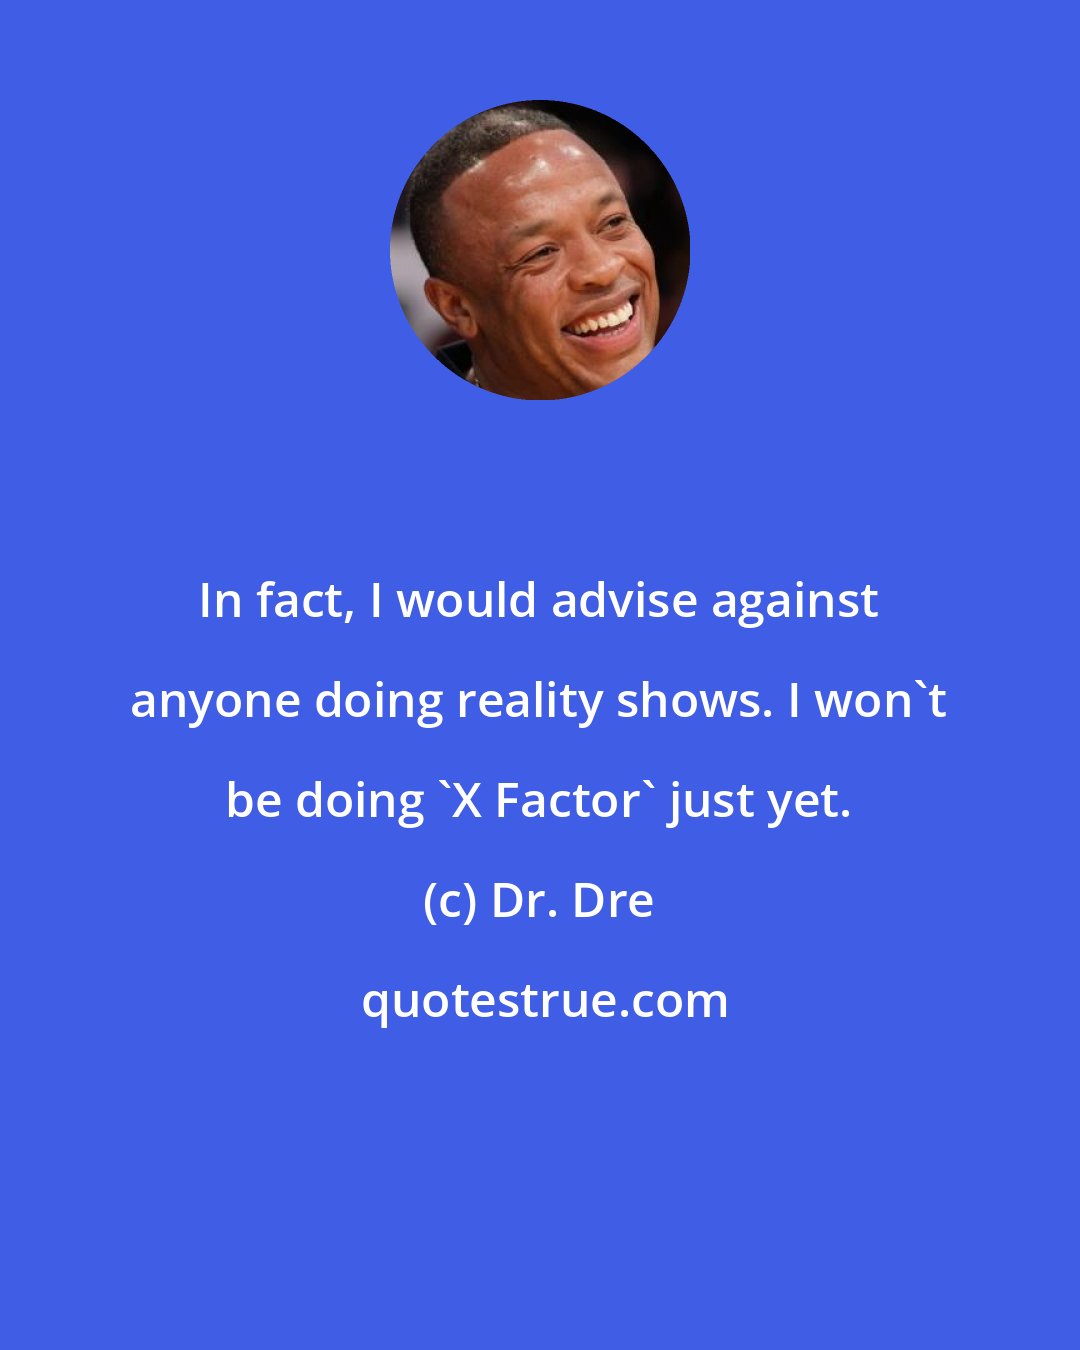 Dr. Dre: In fact, I would advise against anyone doing reality shows. I won't be doing 'X Factor' just yet.